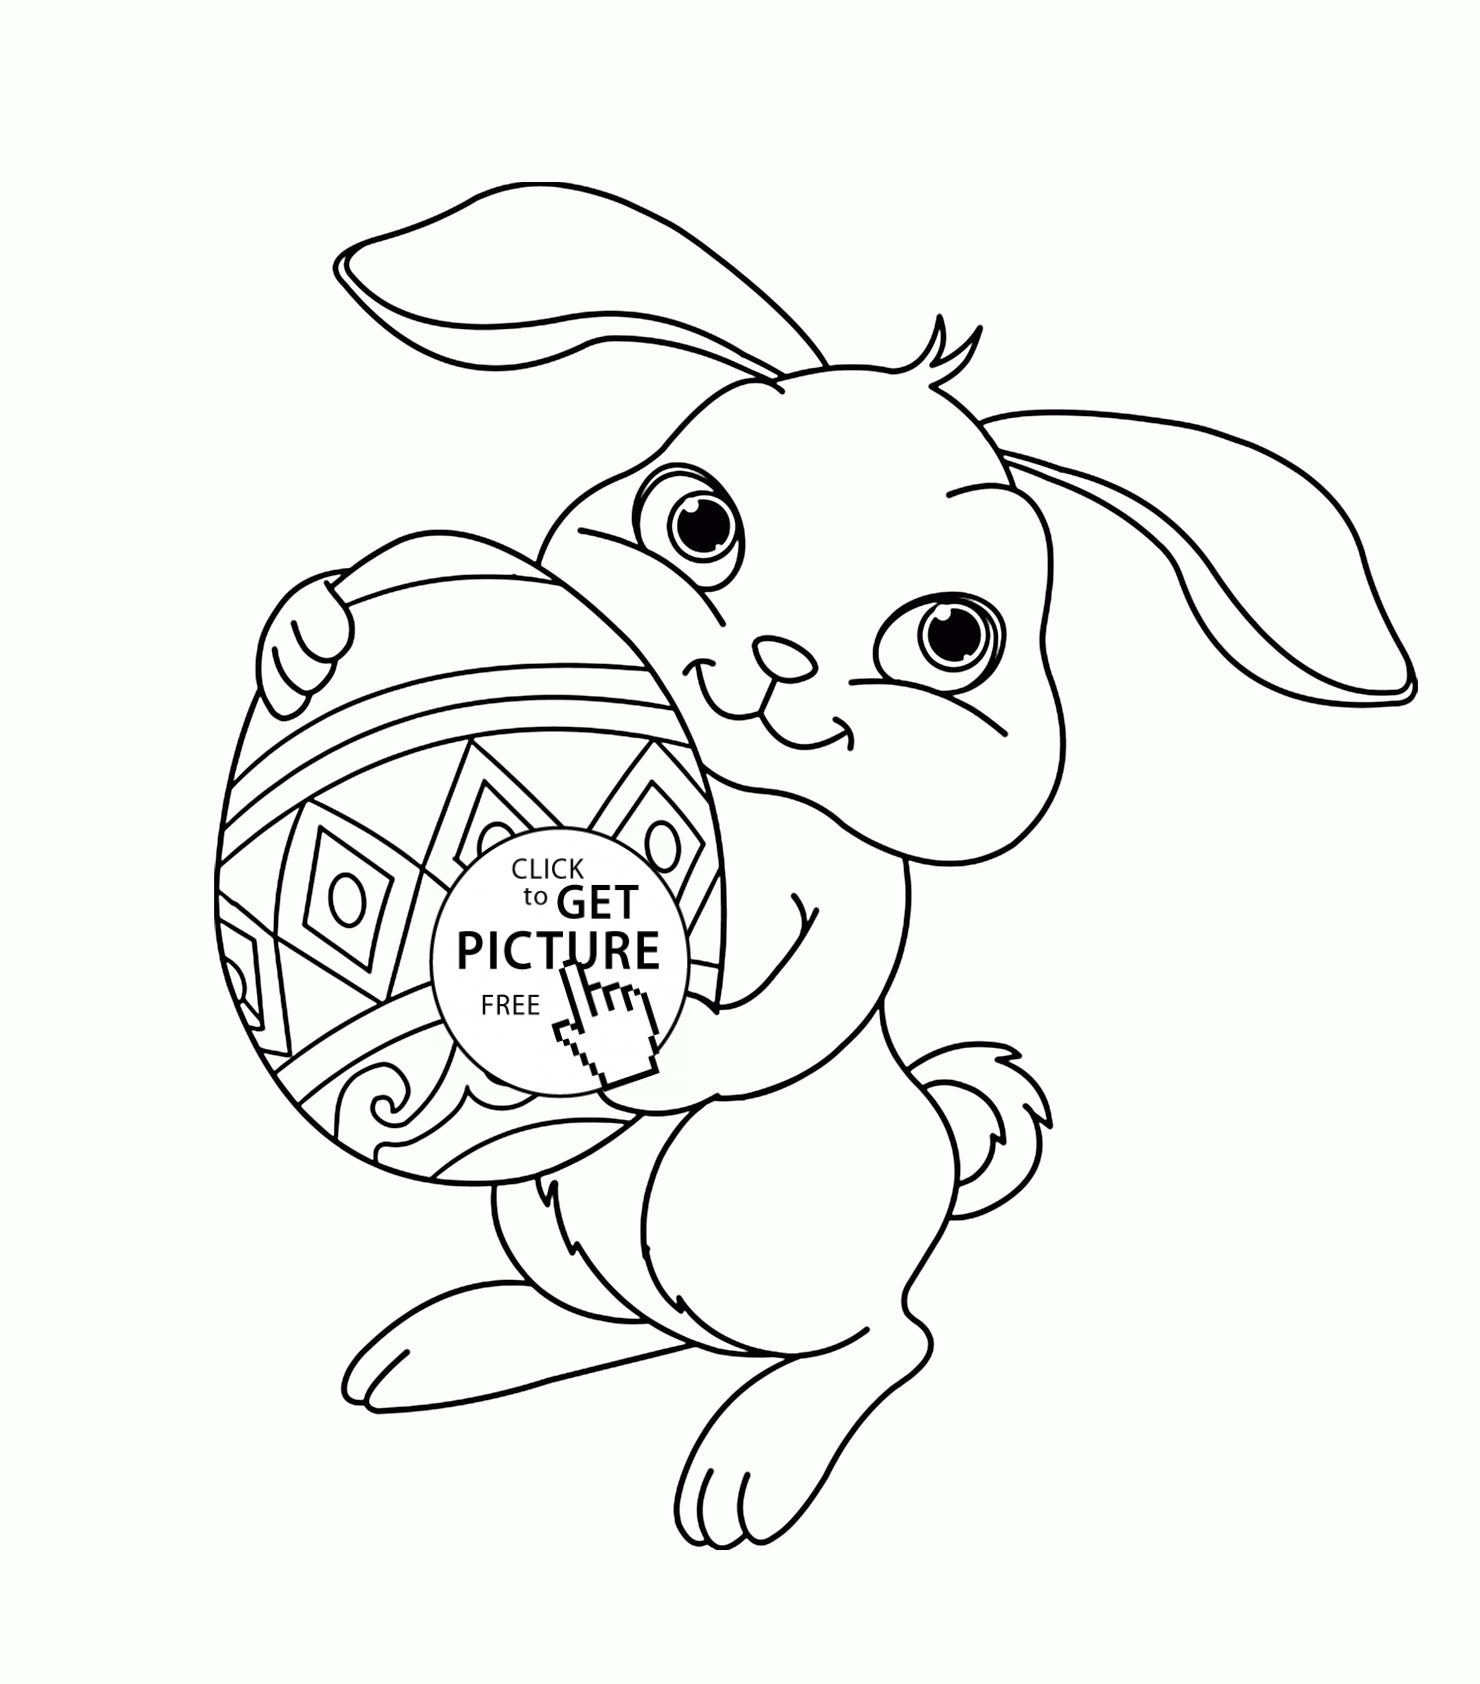 Cute Easter Bunny coloring page for kids, coloring pages